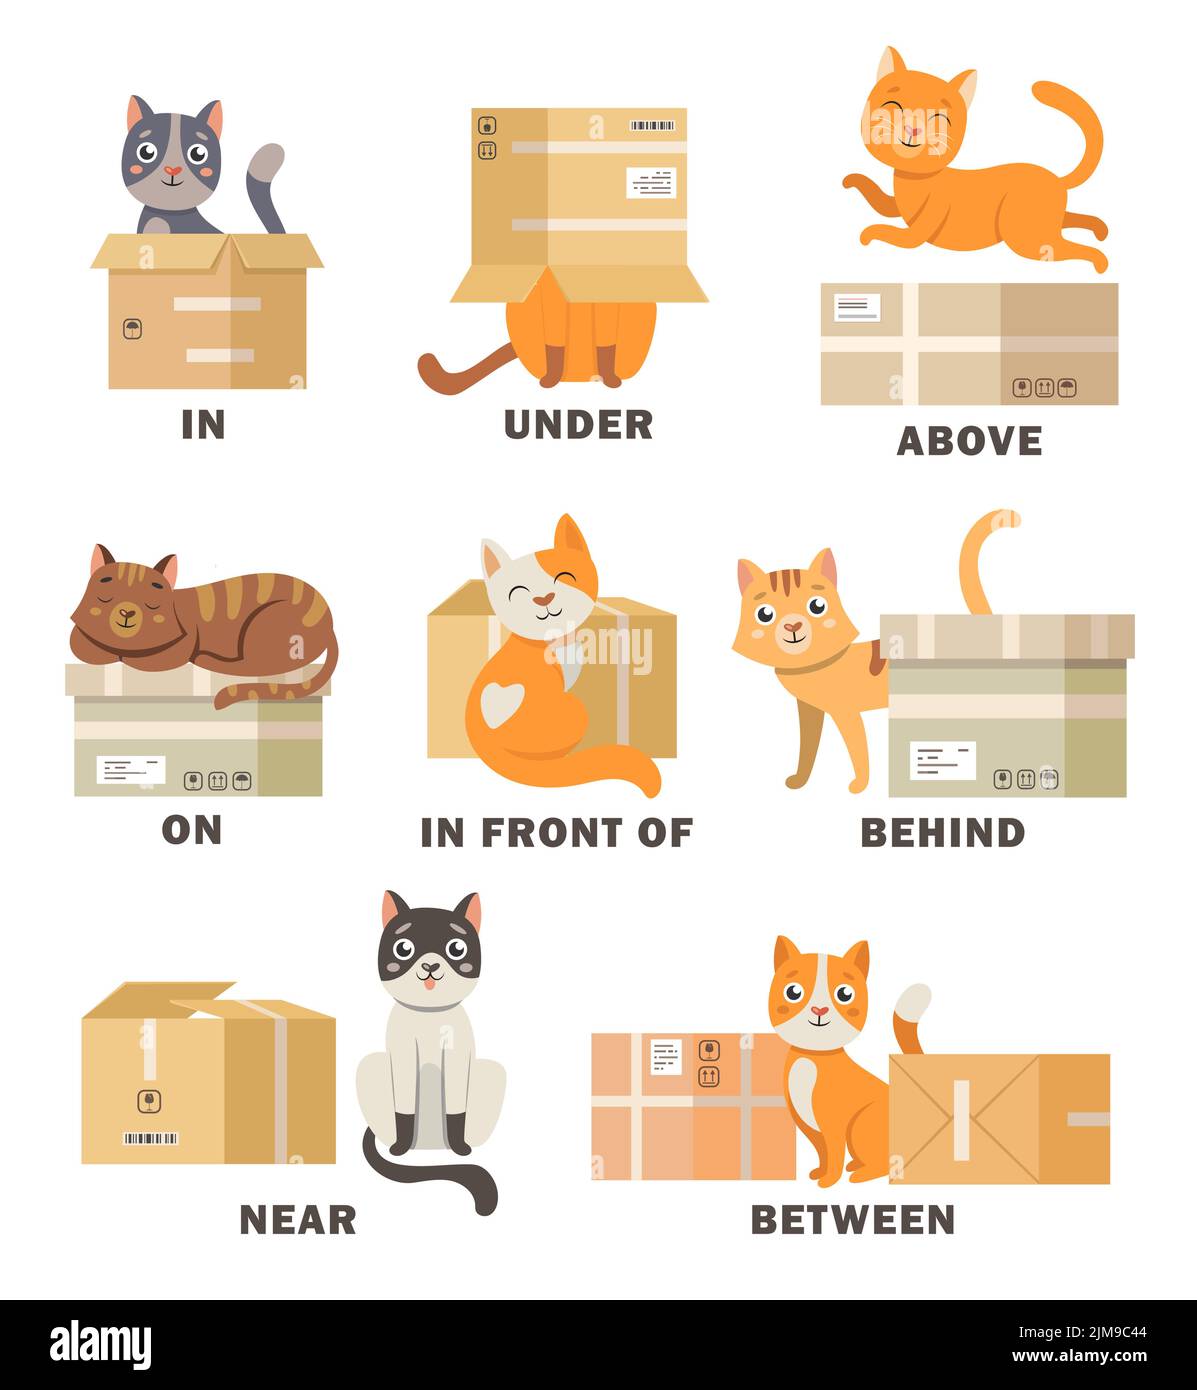 Preposition Cut Out Stock Images & Pictures - Alamy